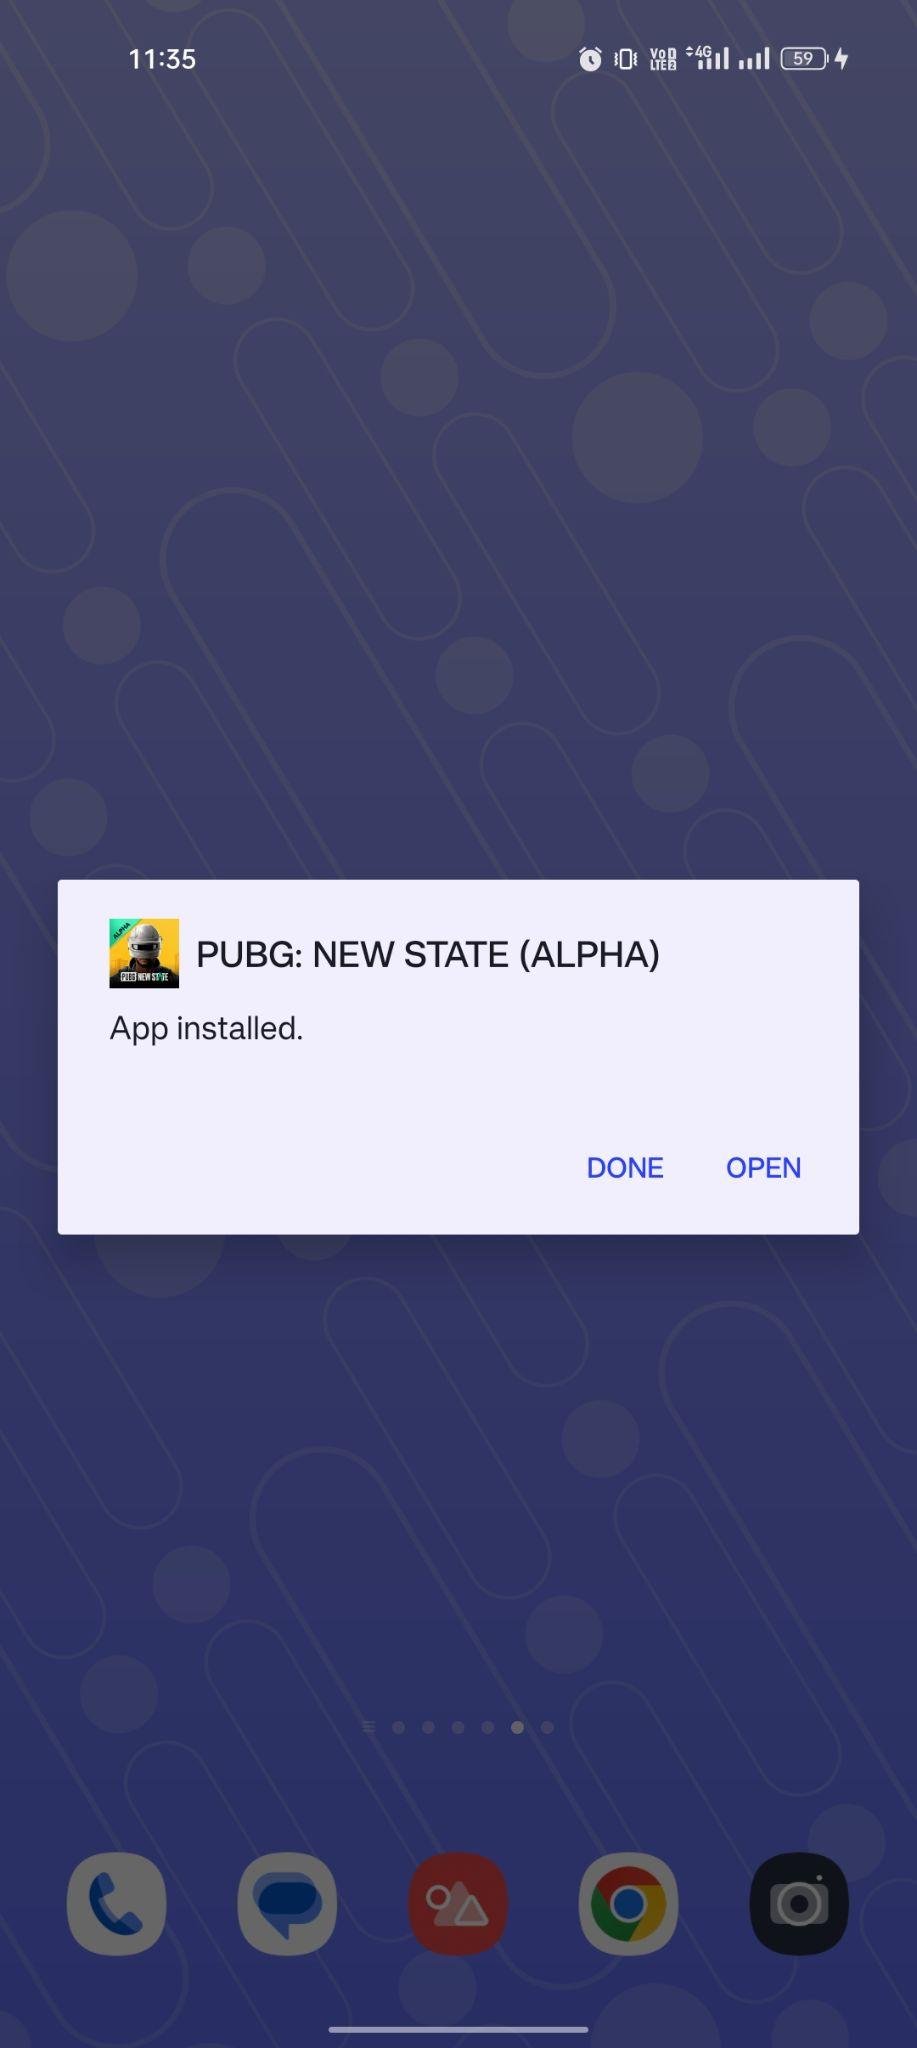 PUBG New State Mobile apk installed